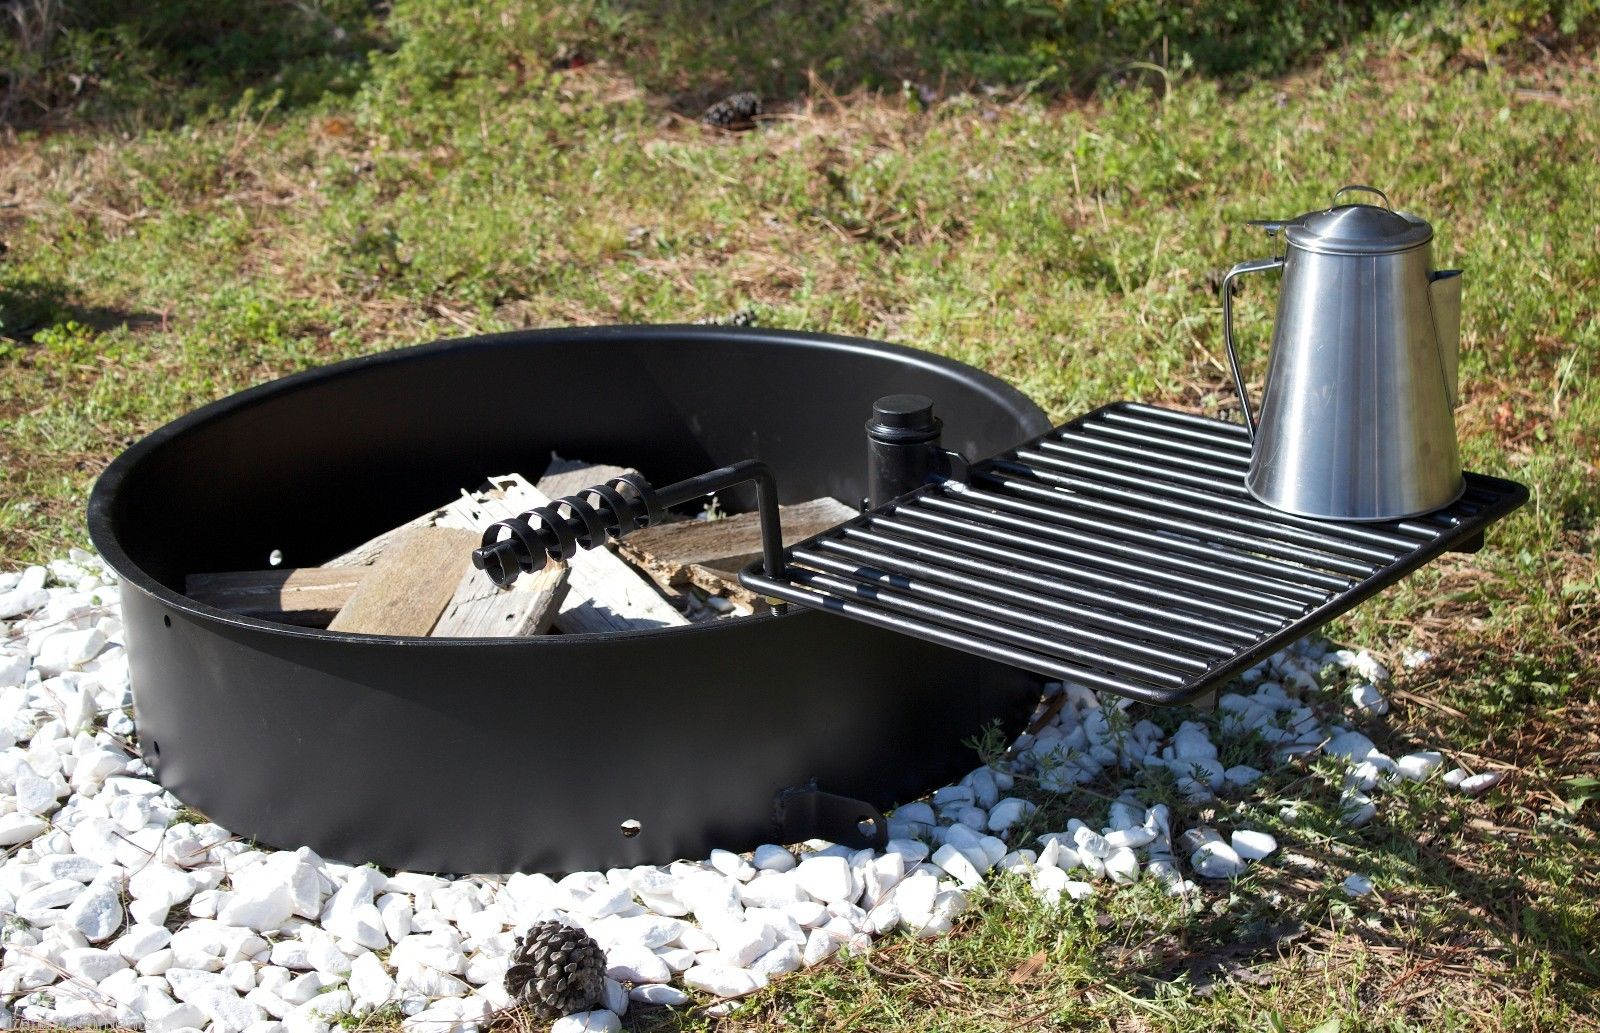 24 Steel Fire Ring With Cooking Grate Campfire Pit Park Grill in dimensions 1600 X 1033